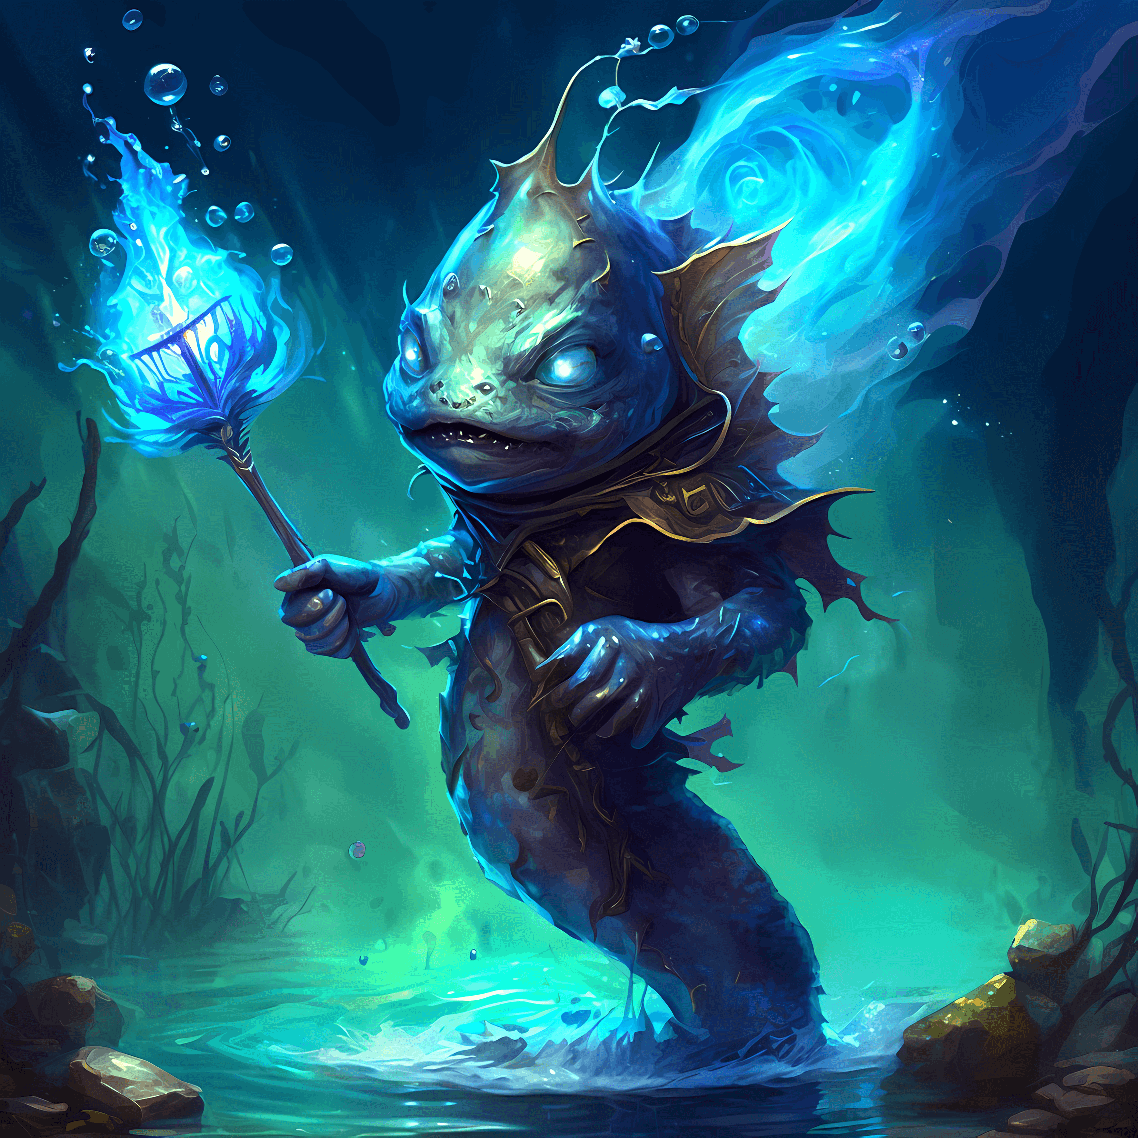 Necrofish - The Enigmatic Sorcerer of the Deep